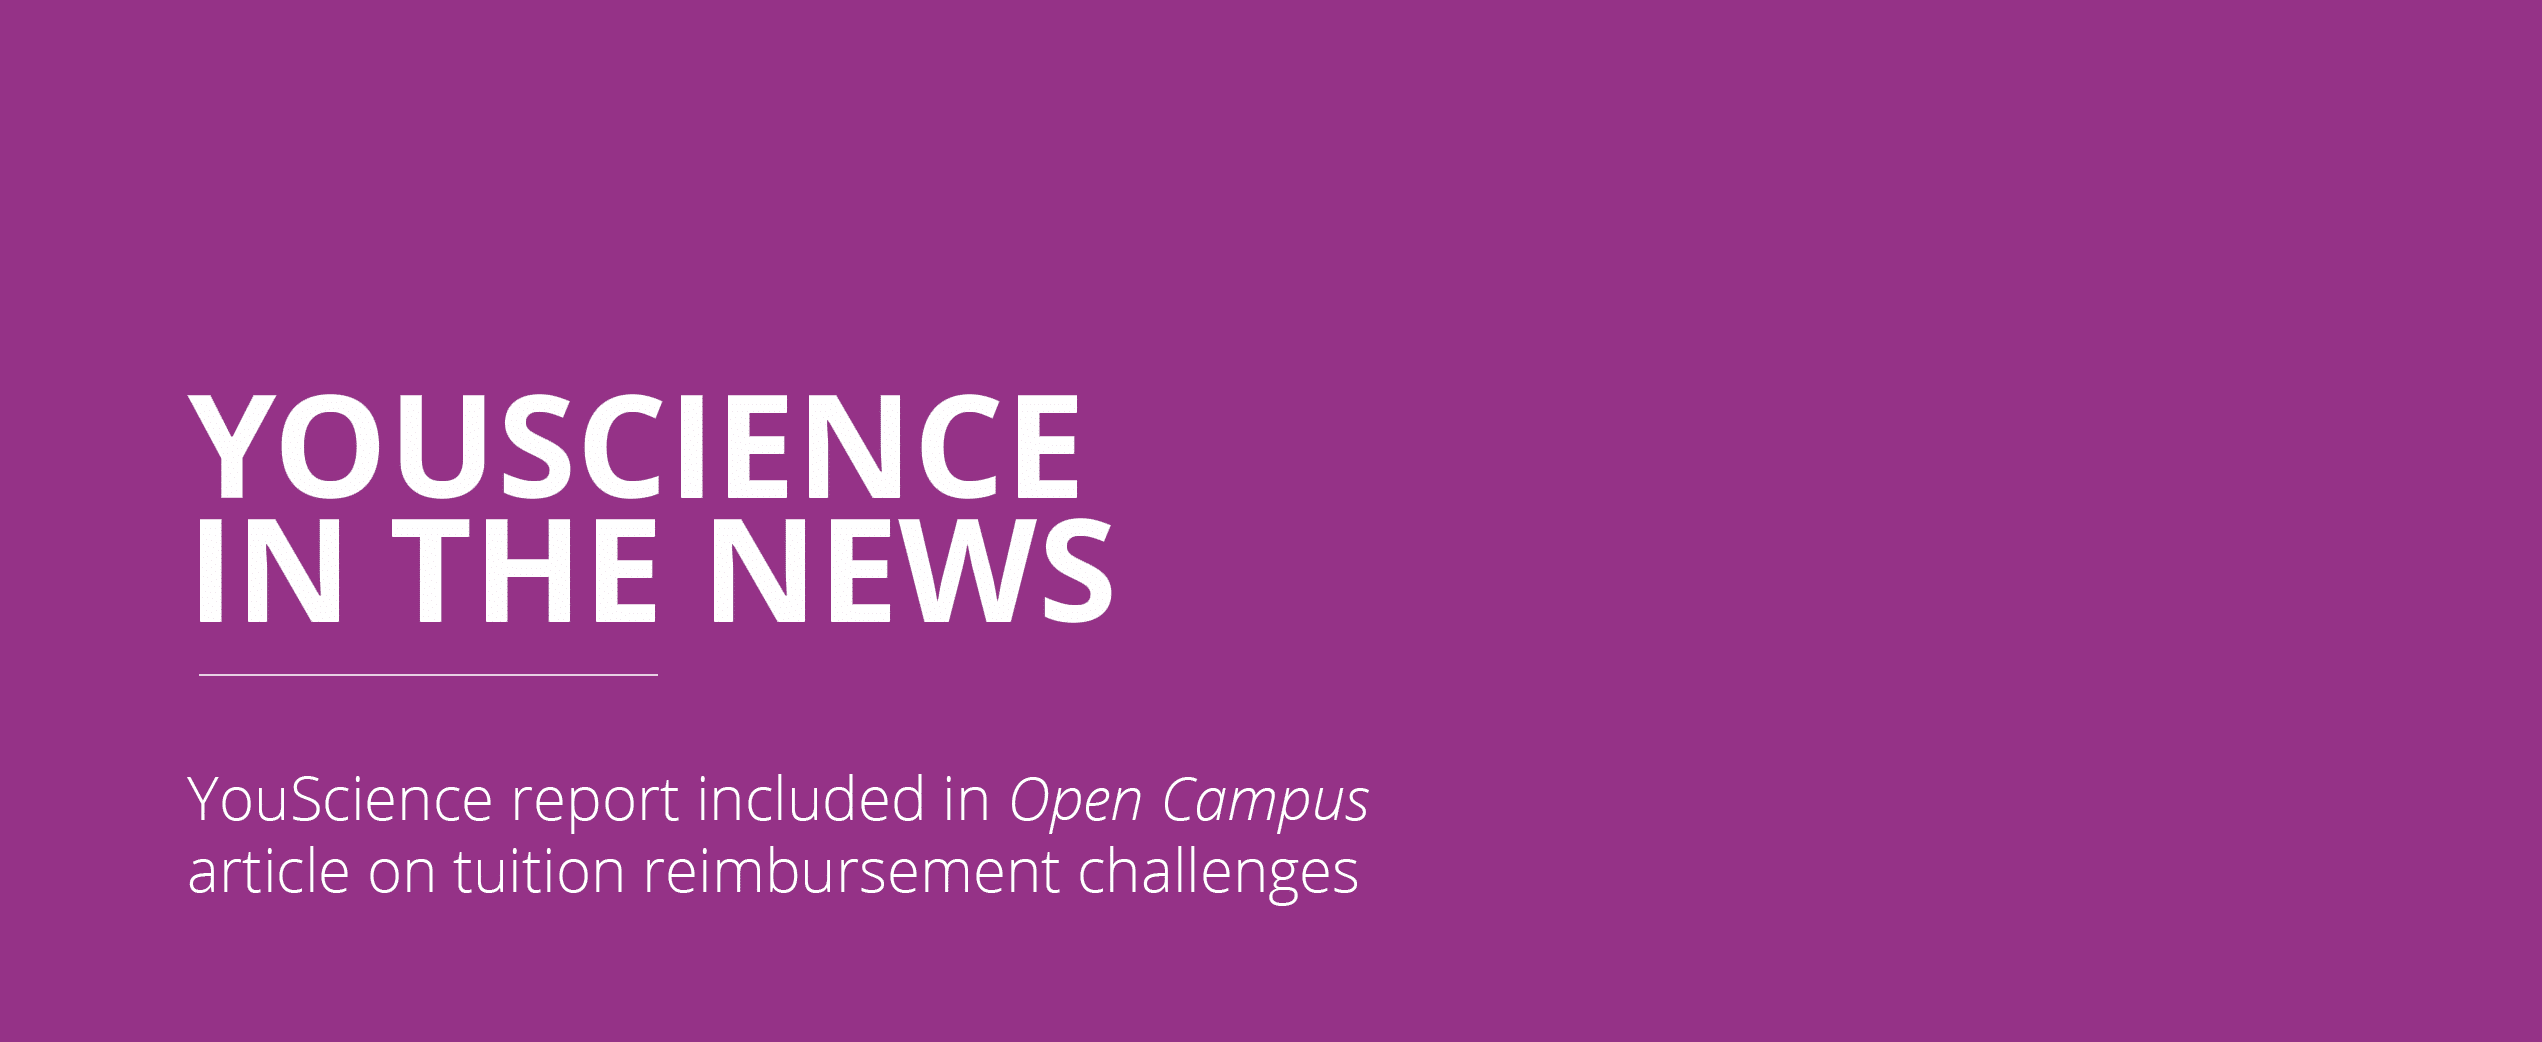 YouScience report included in Open Campus article on tuition reimbursement challenges